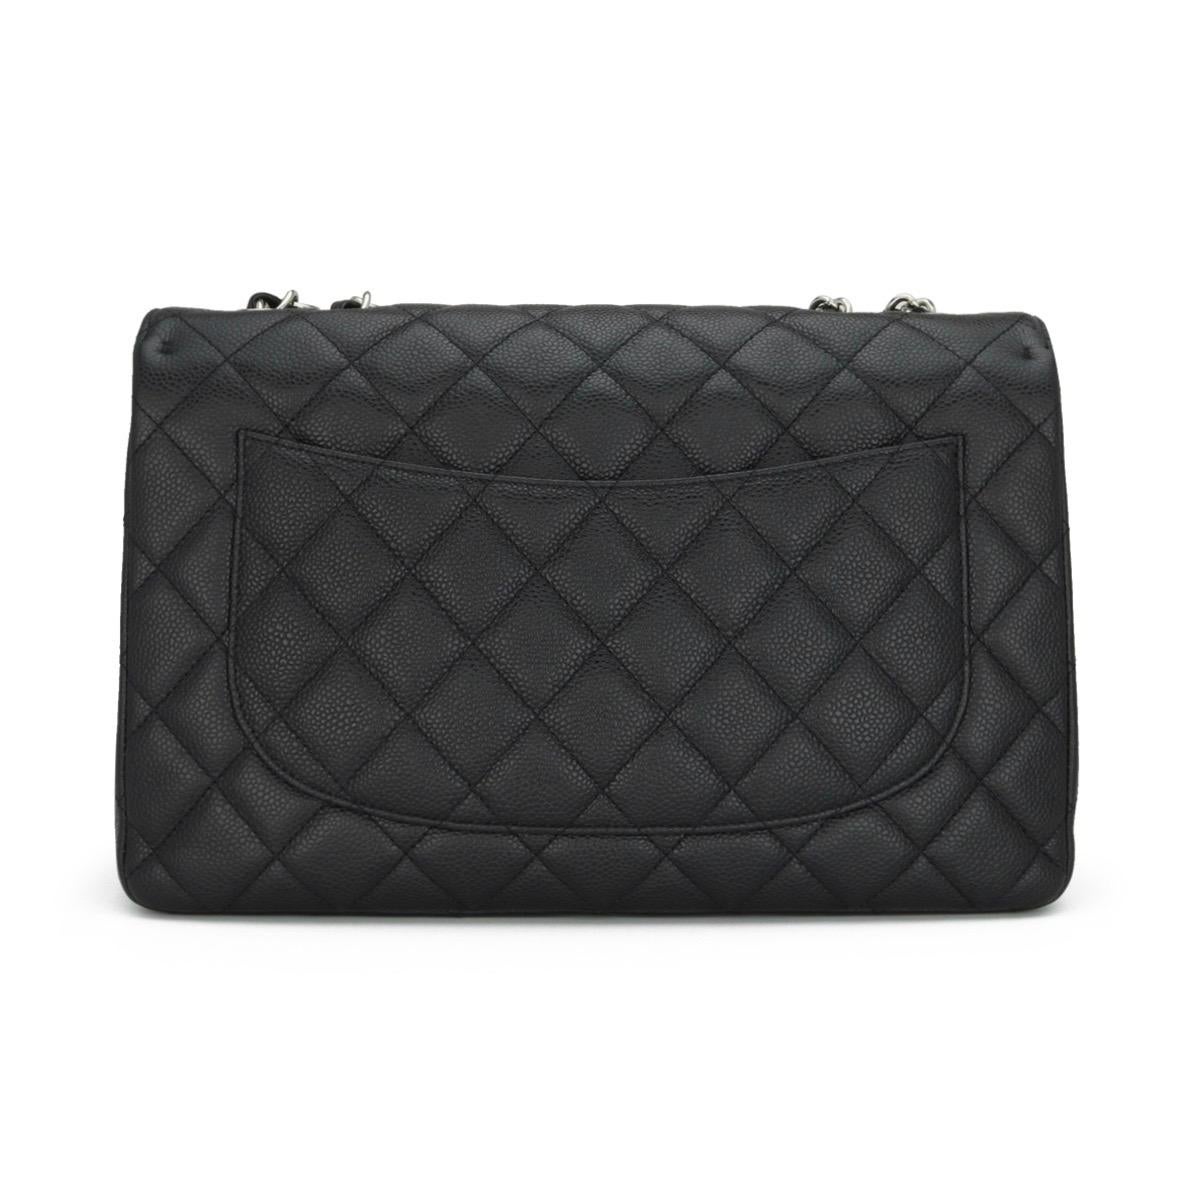 CHANEL Single Flap Jumbo Bag in Black Caviar with Silver-Tone Hardware 2010 In Good Condition For Sale In Huddersfield, GB